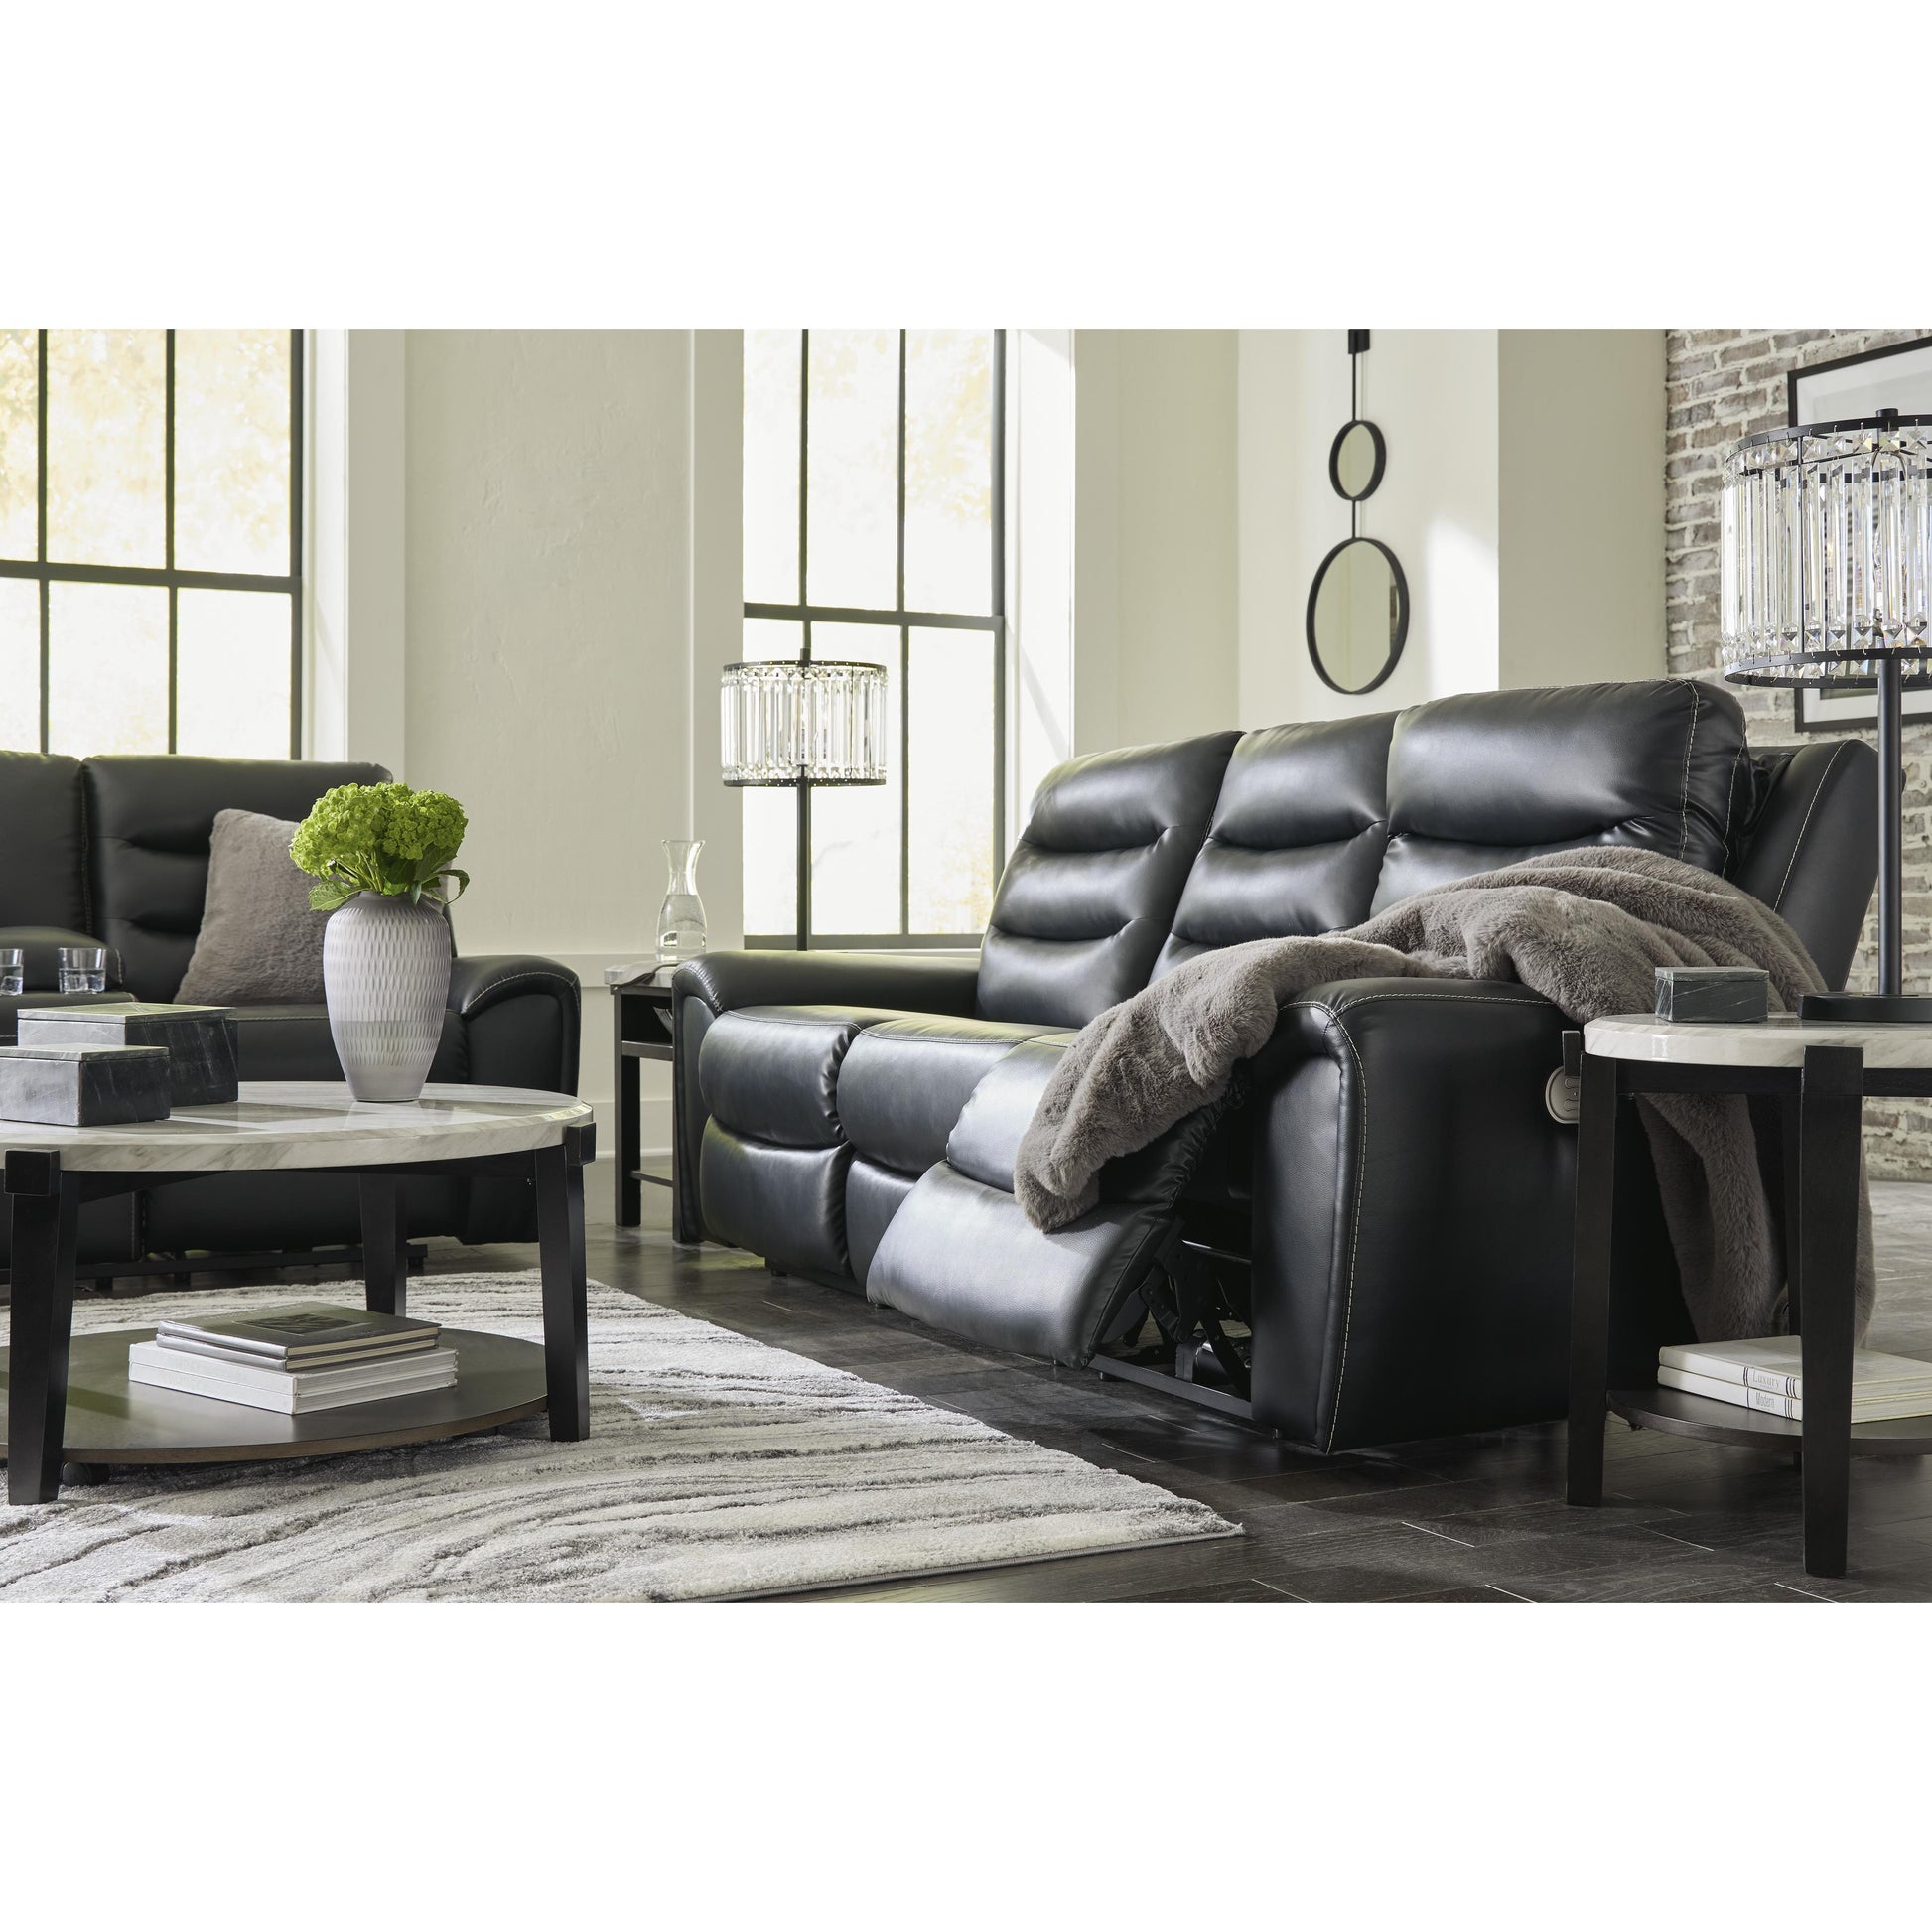 Signature Design by Ashley Warlin Power Reclining Leather Look Loveseat 6110518 IMAGE 11